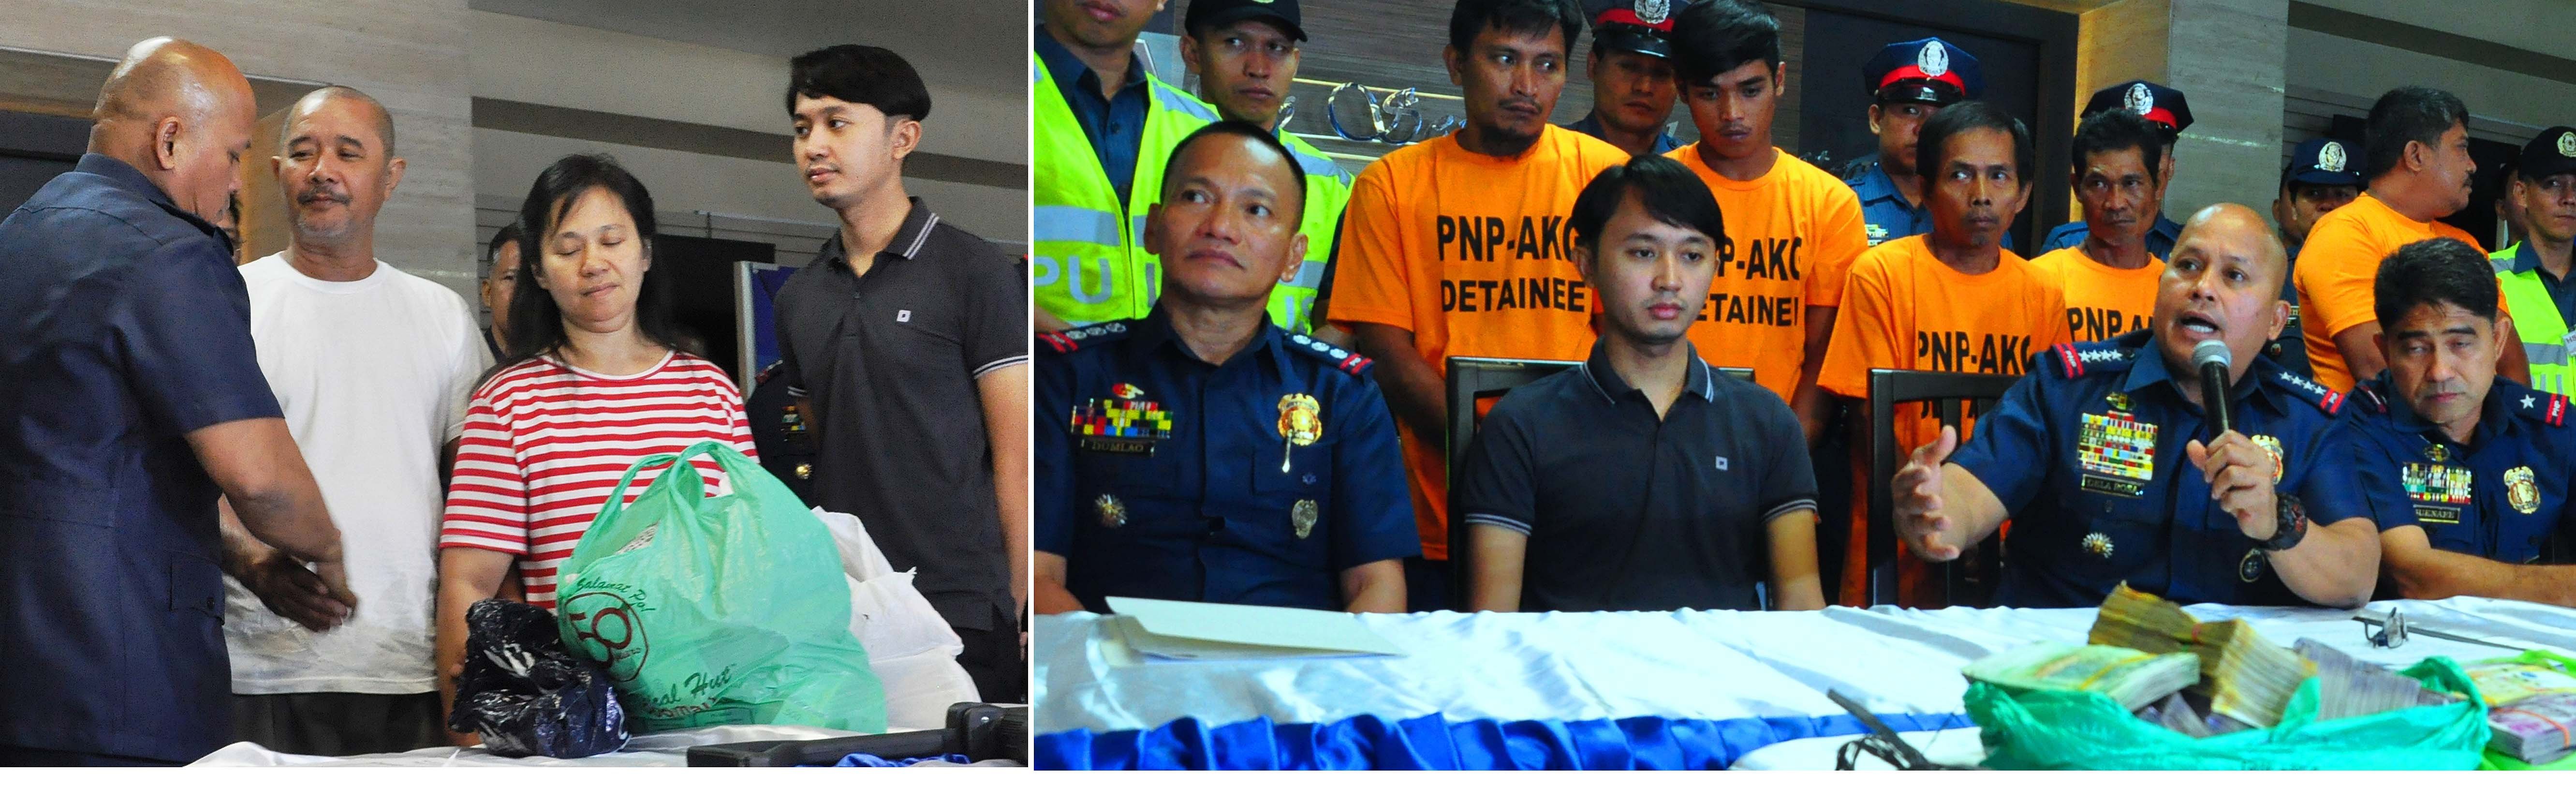 PNP rescues kidnapped trader, arrests 5 suspects